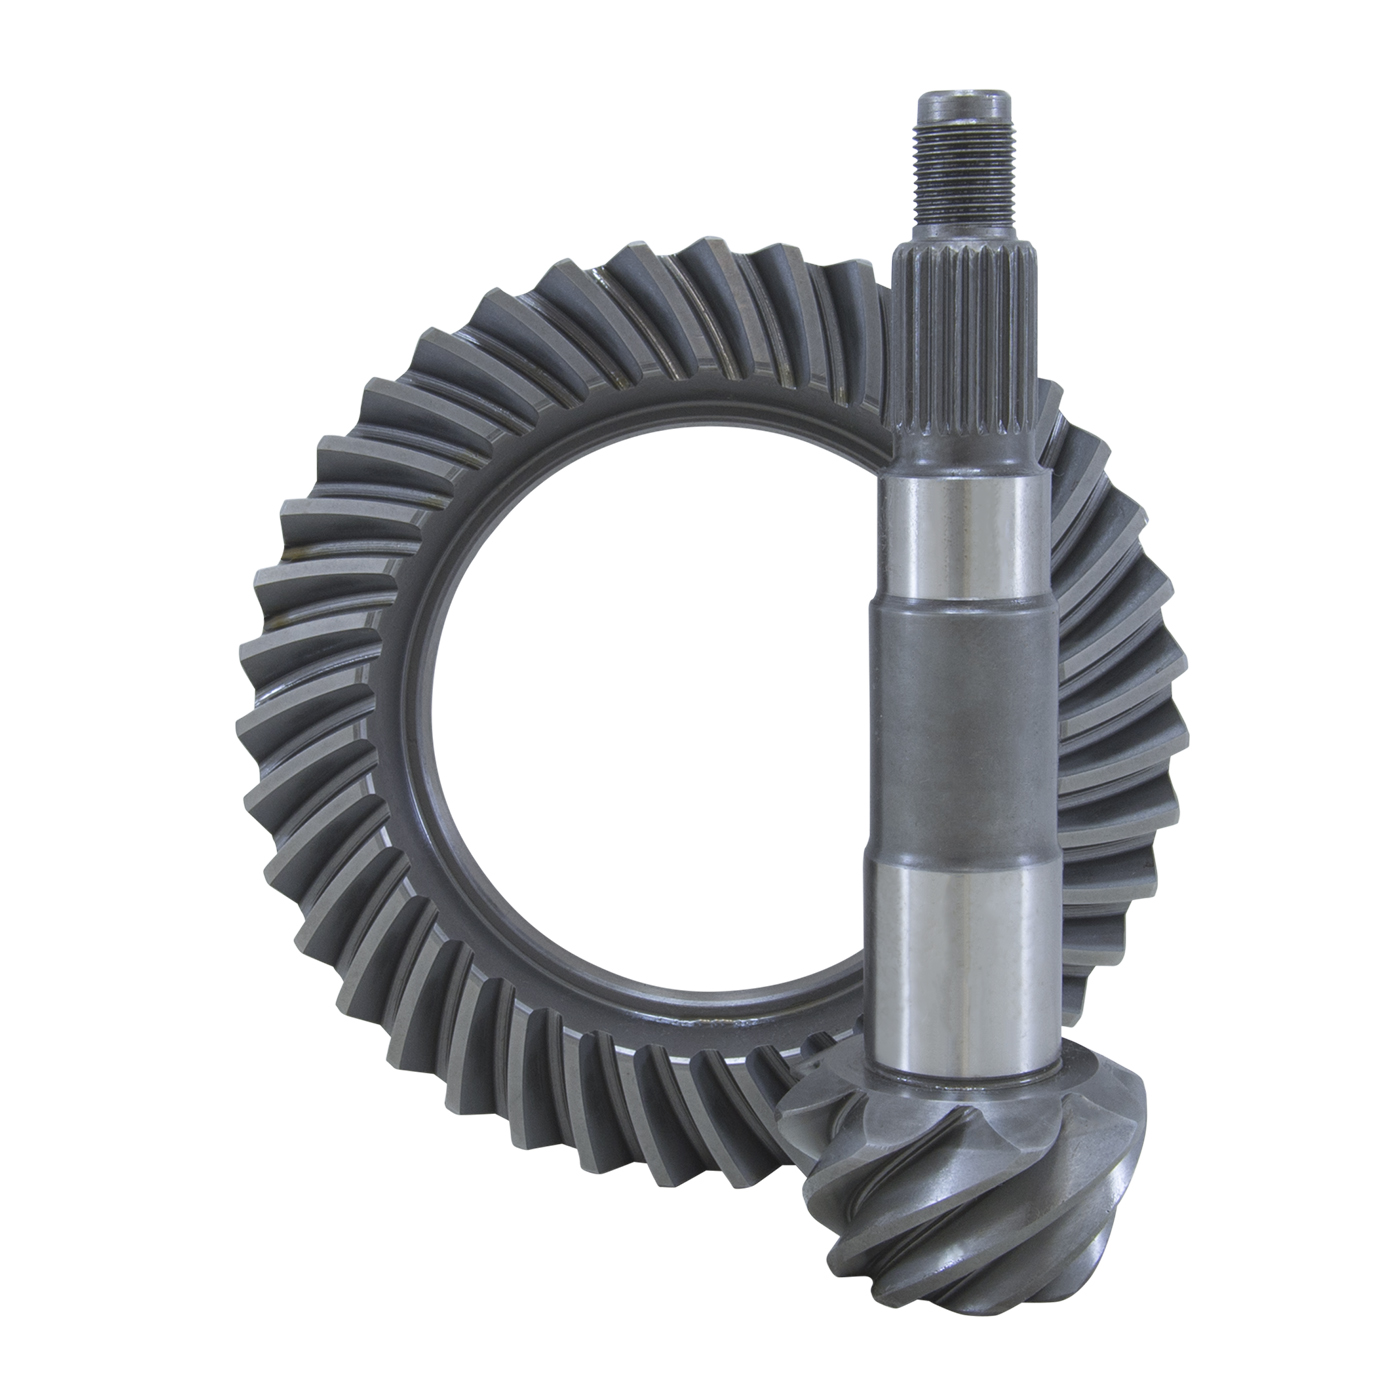 USA Standard 36247 Ring & Pinion Gear Set, For Toyota 7.5 in. Reverse Rotation, 5.29 Ratio